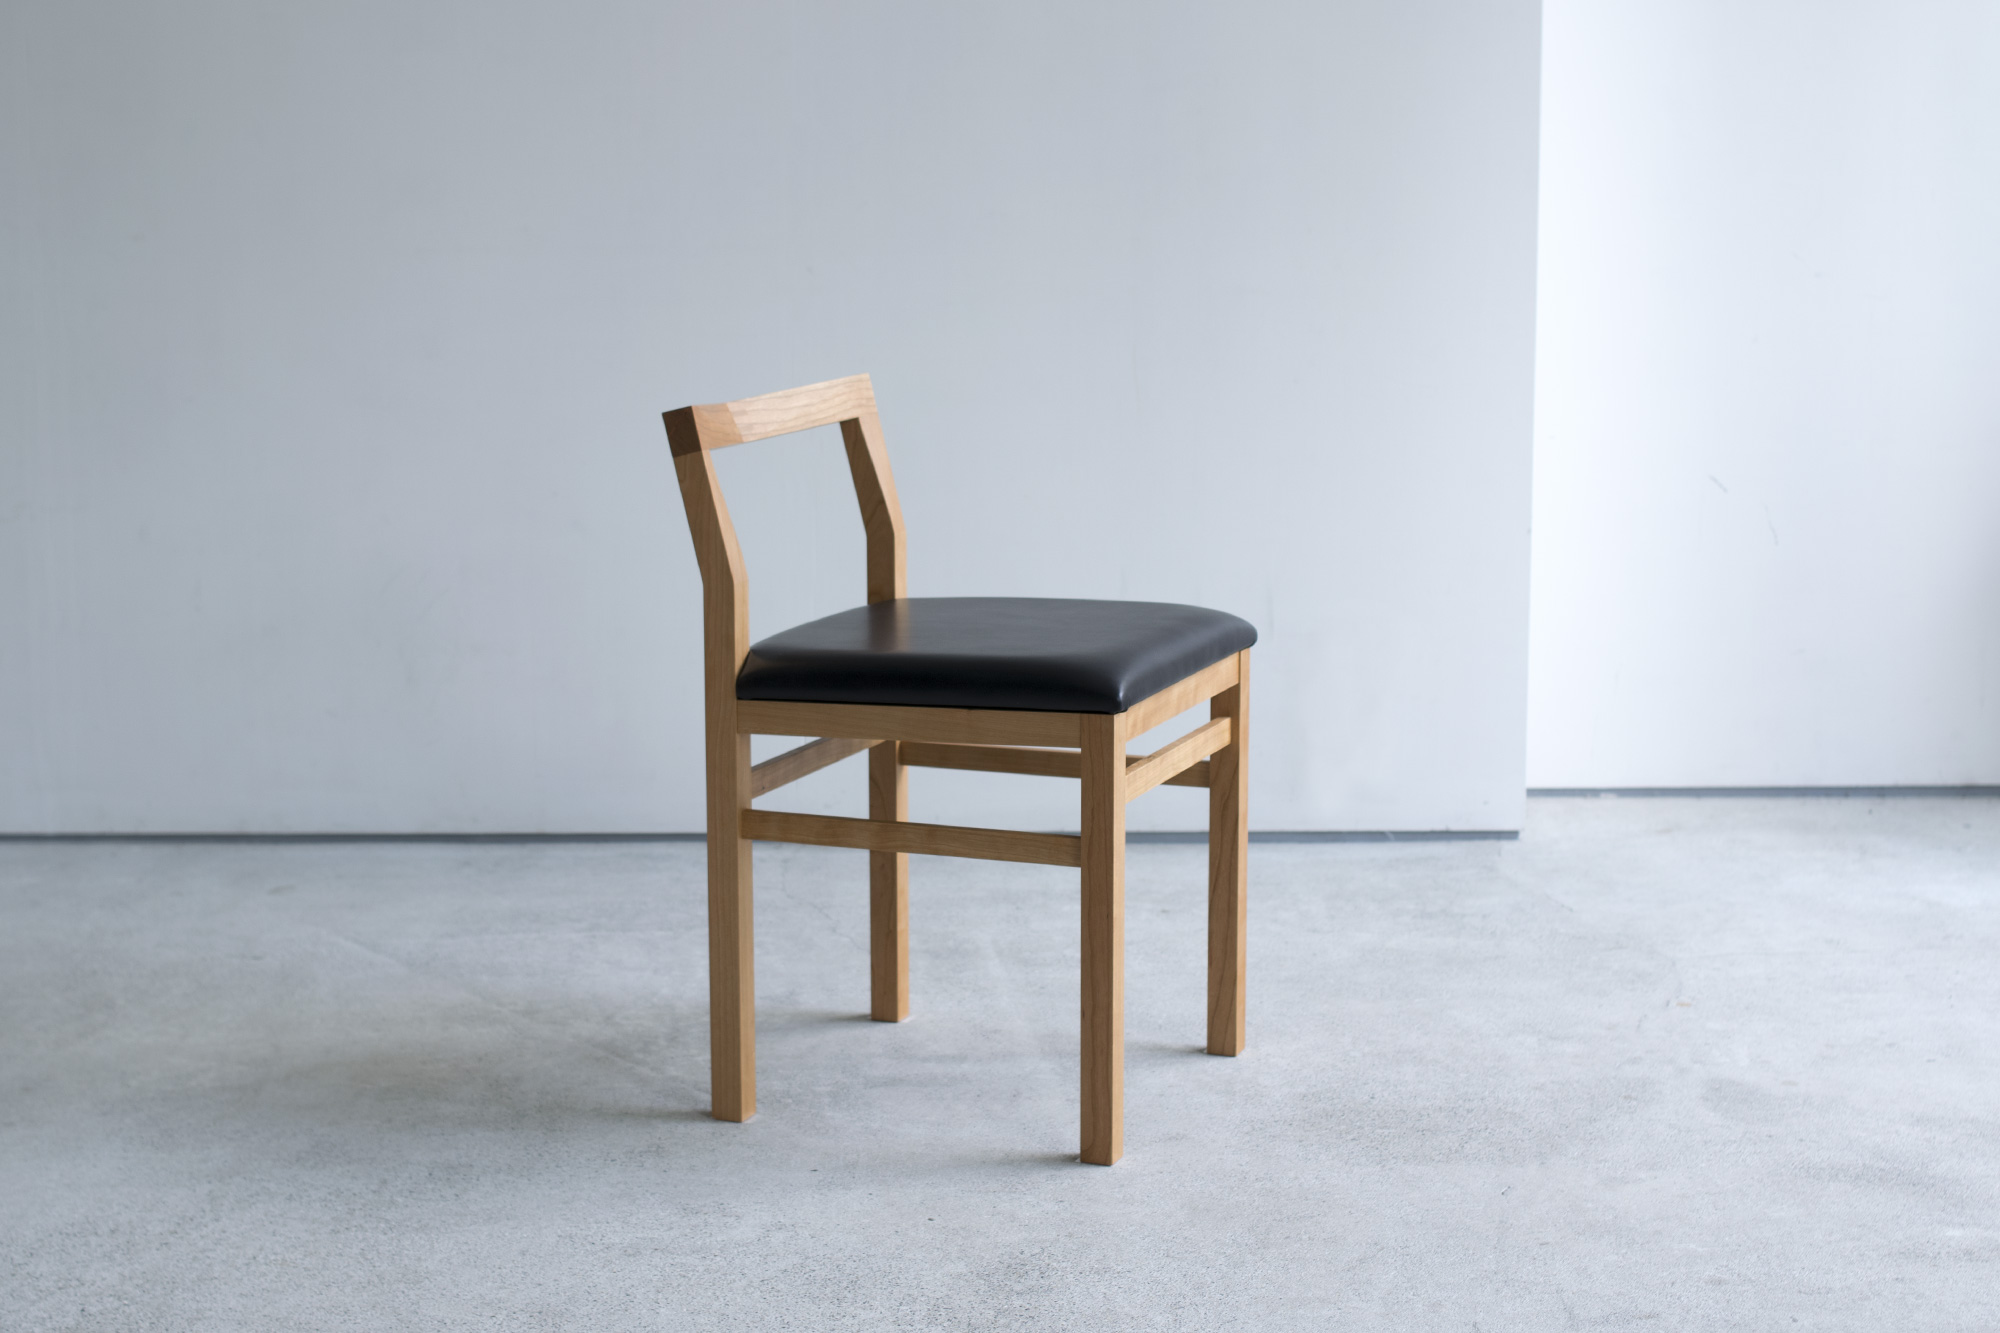 PICO Chair　（ピコチェア・アメリカンチェリー材・黒革）